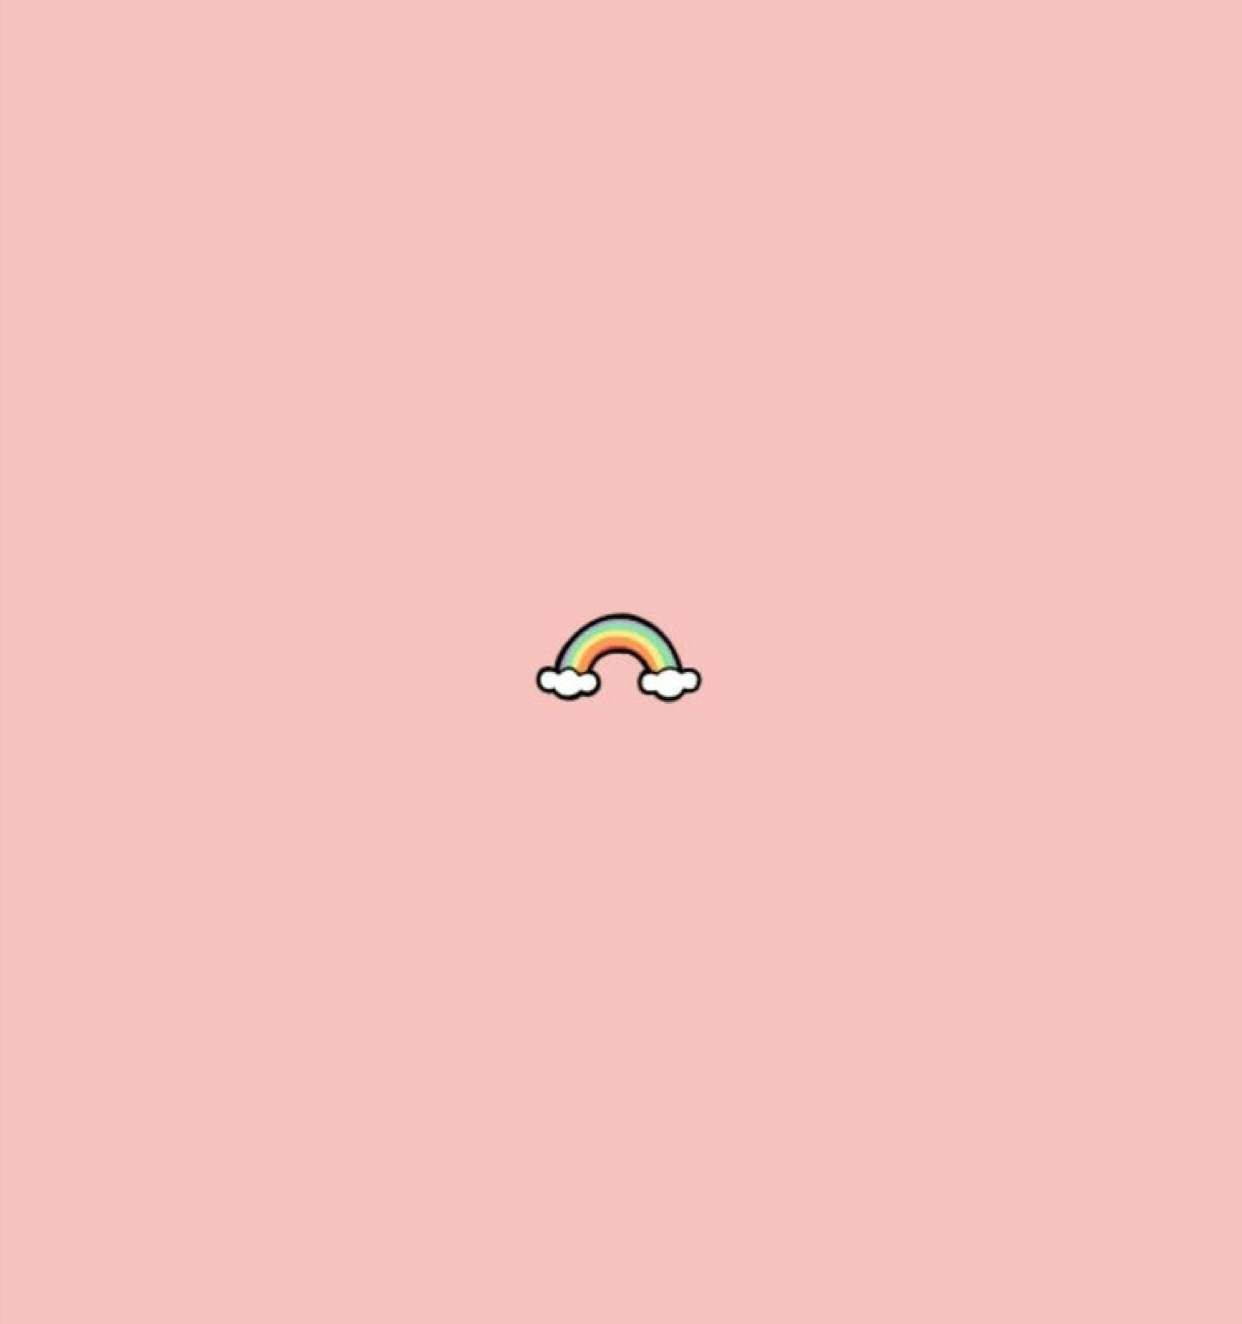 Tiny Rainbow On Cute And Pink Backdrop Background